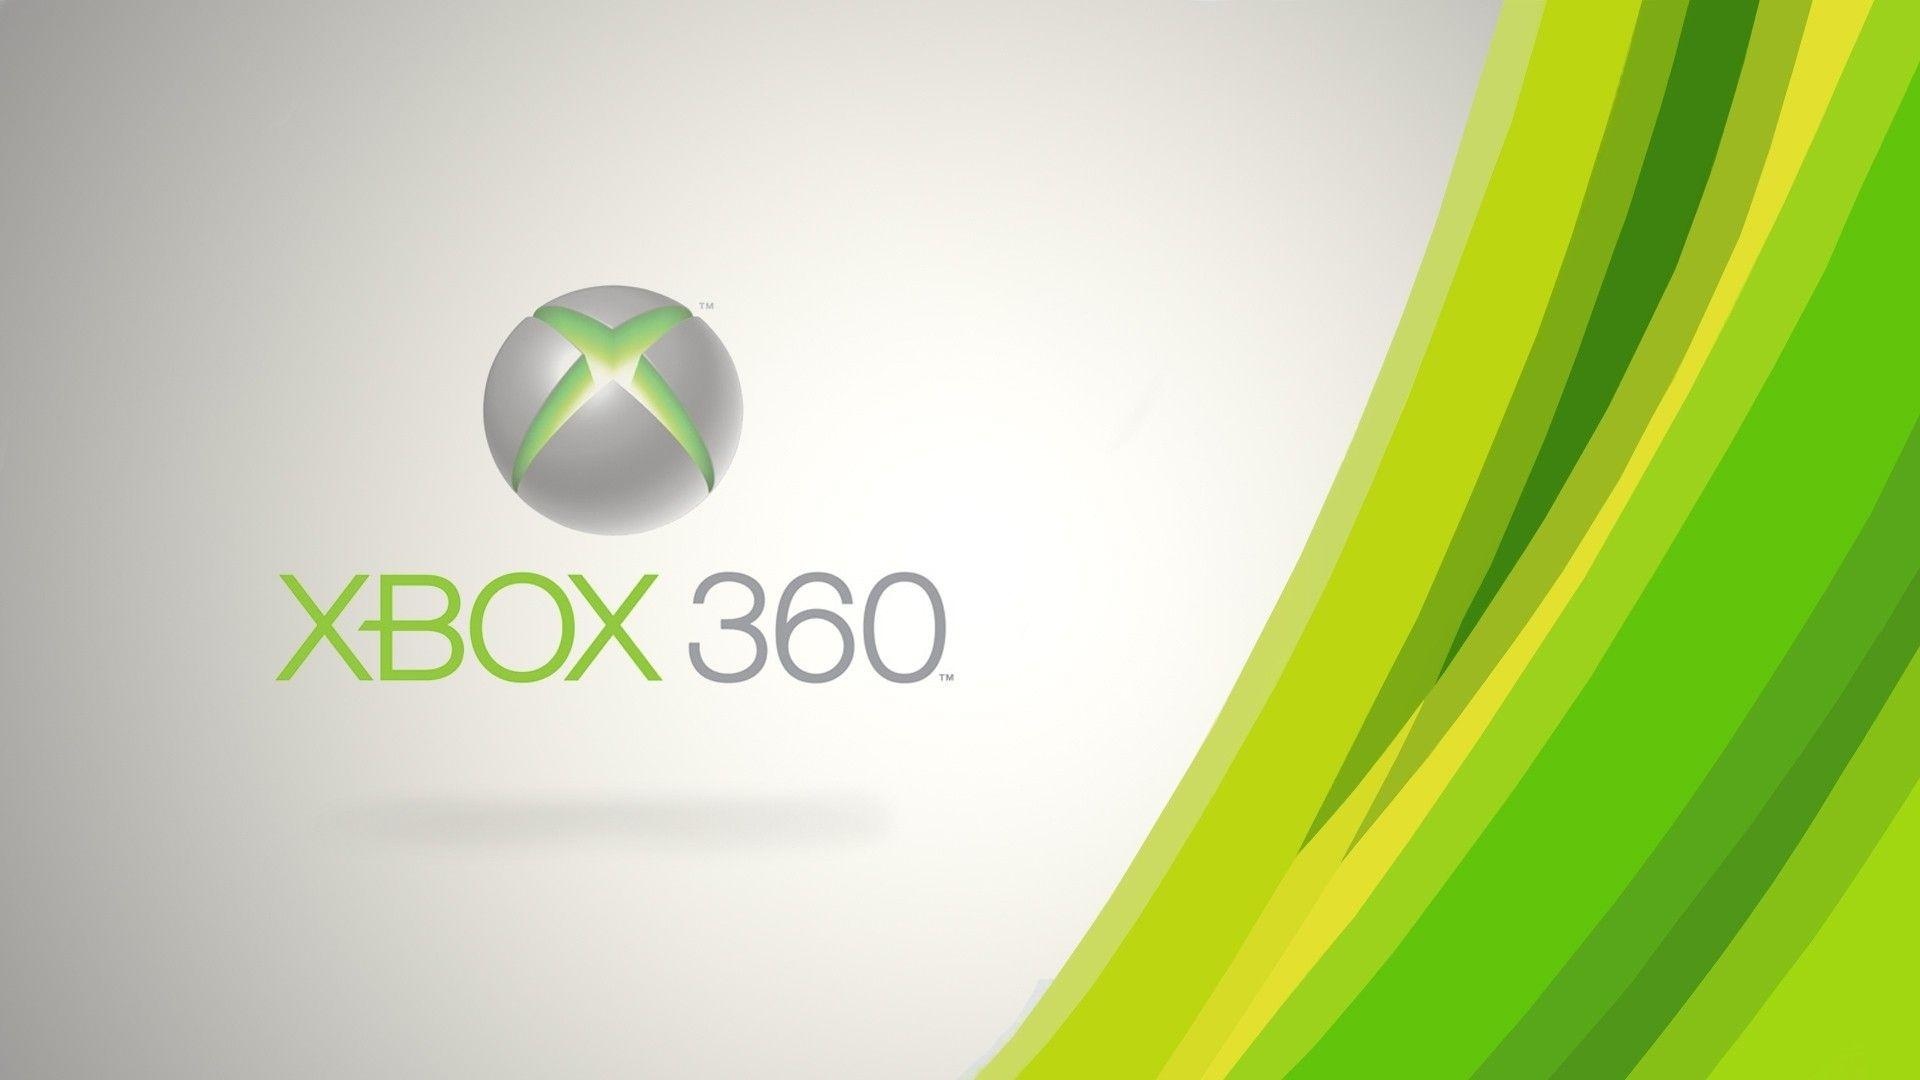 Xbox: Released in November 2005, Competing with Sony's PlayStation 3 and Nintendo's Wii. 1920x1080 Full HD Wallpaper.